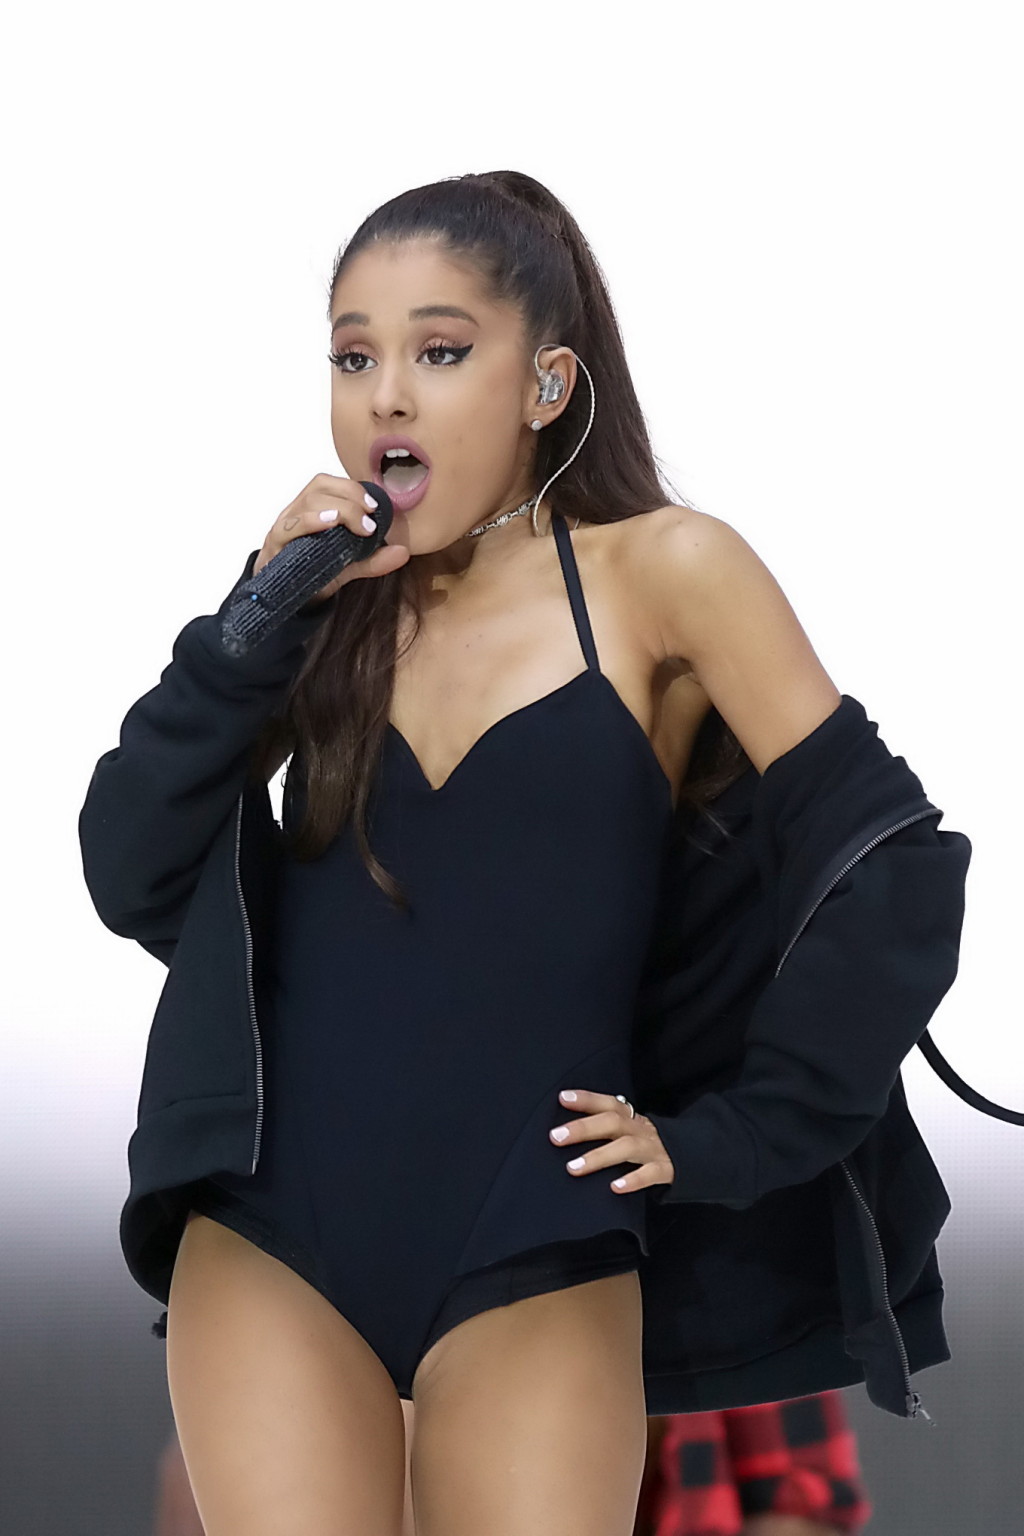 Ariana Grande shows off her shaved pussy in a tiny black outfit while performing #75161966